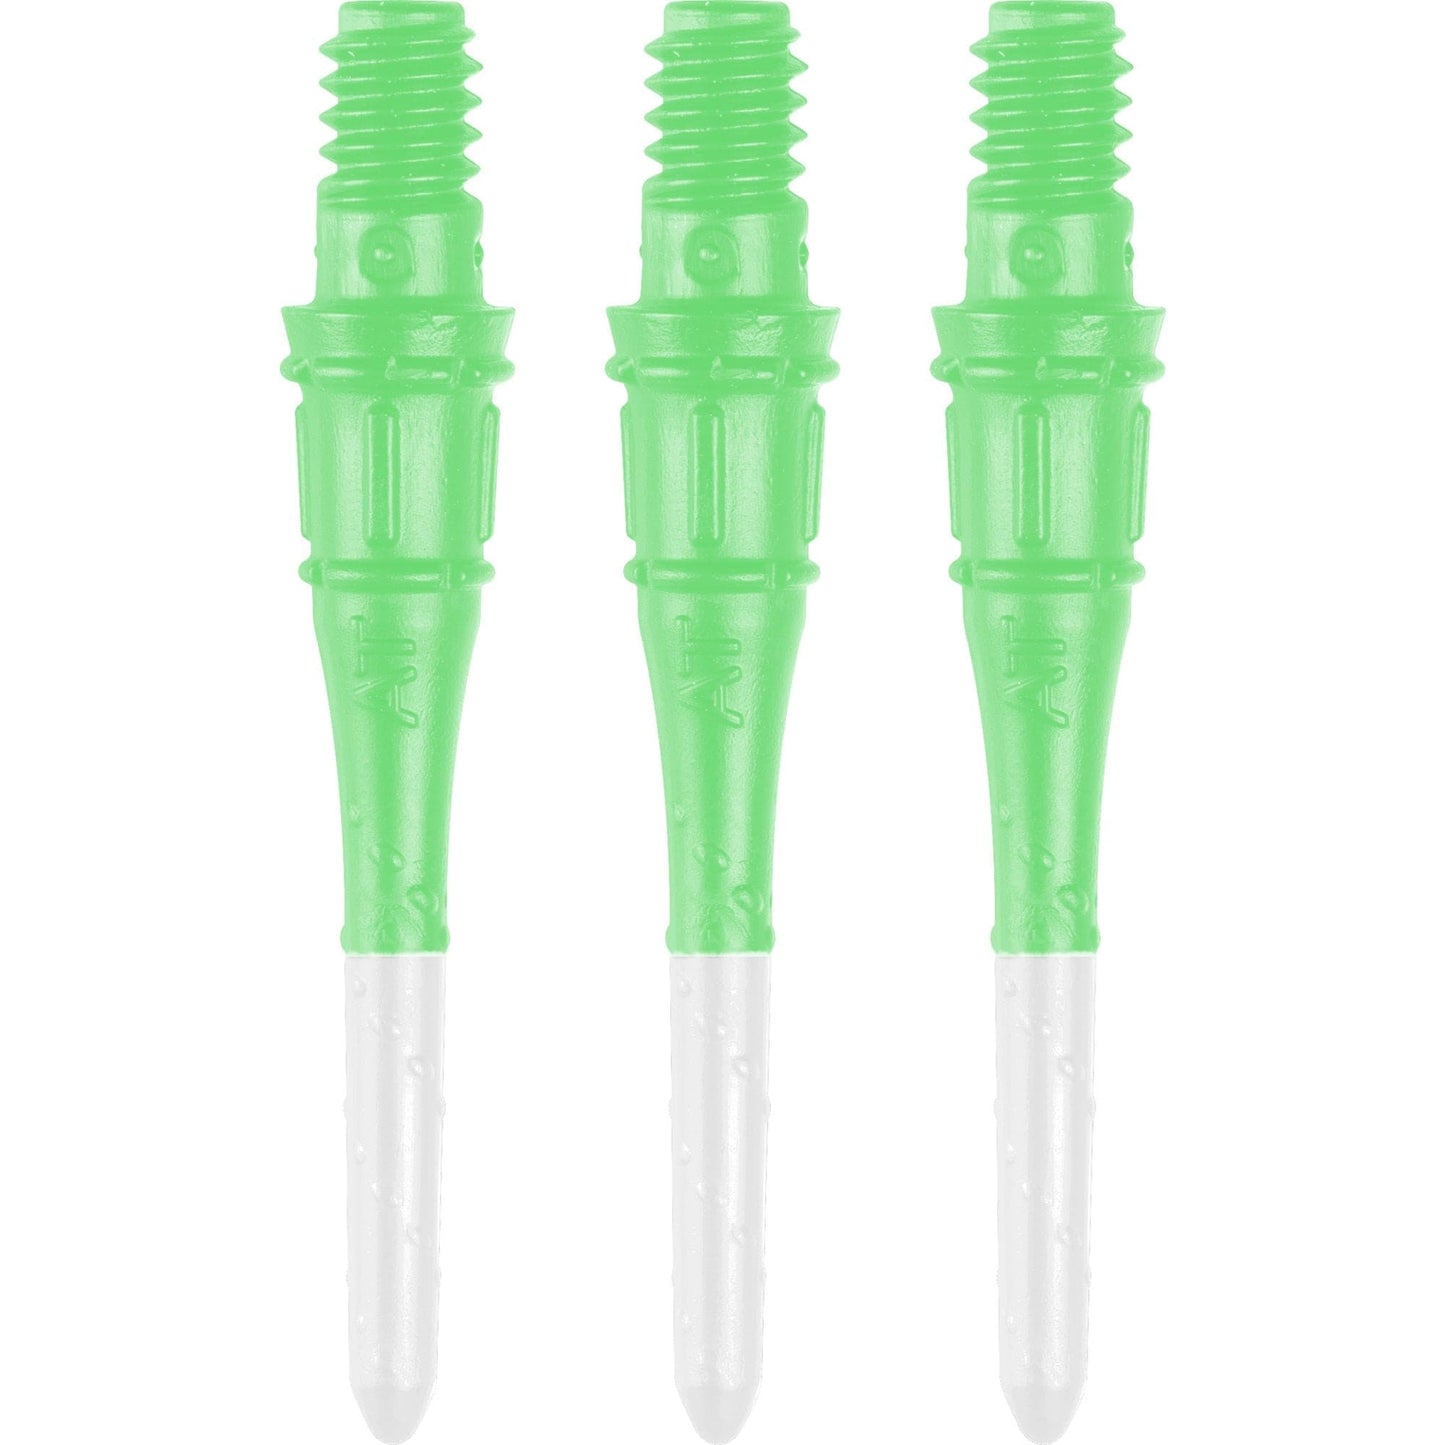 L-Style Premium Lippoints Two Tone - Spare Tips - Lip Points - 2ba - Pack 30 Green